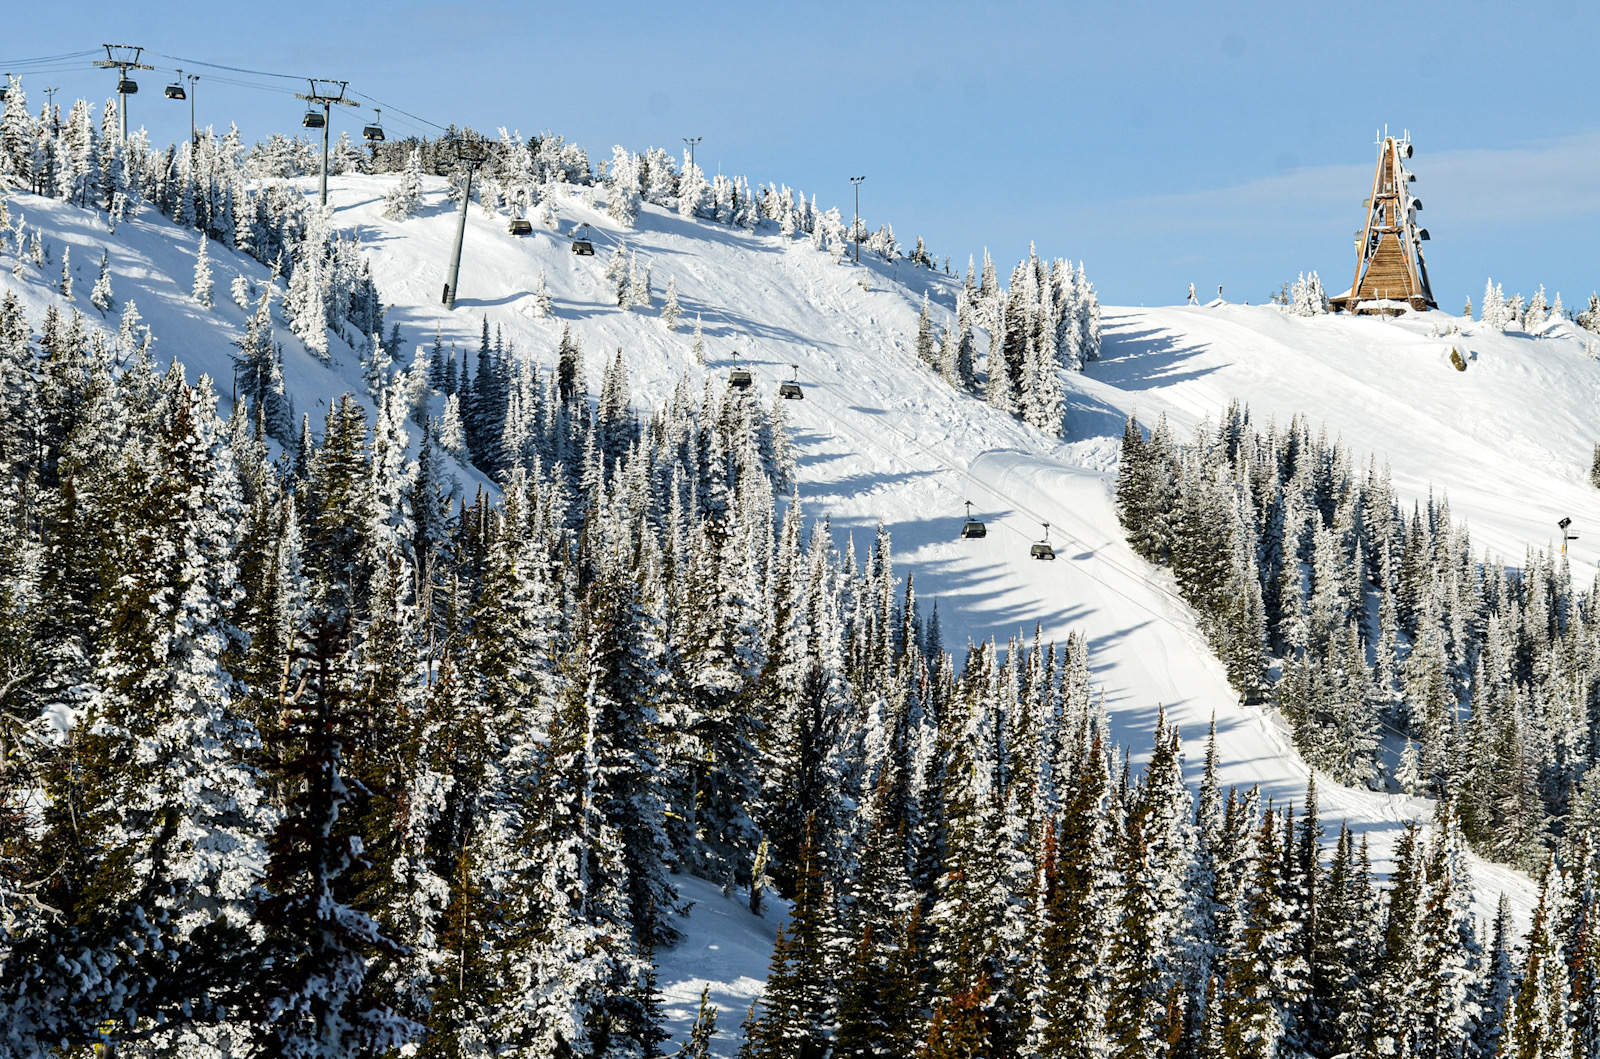 View of bubble chairlift at Mission Ridge from a distance on a sunny day